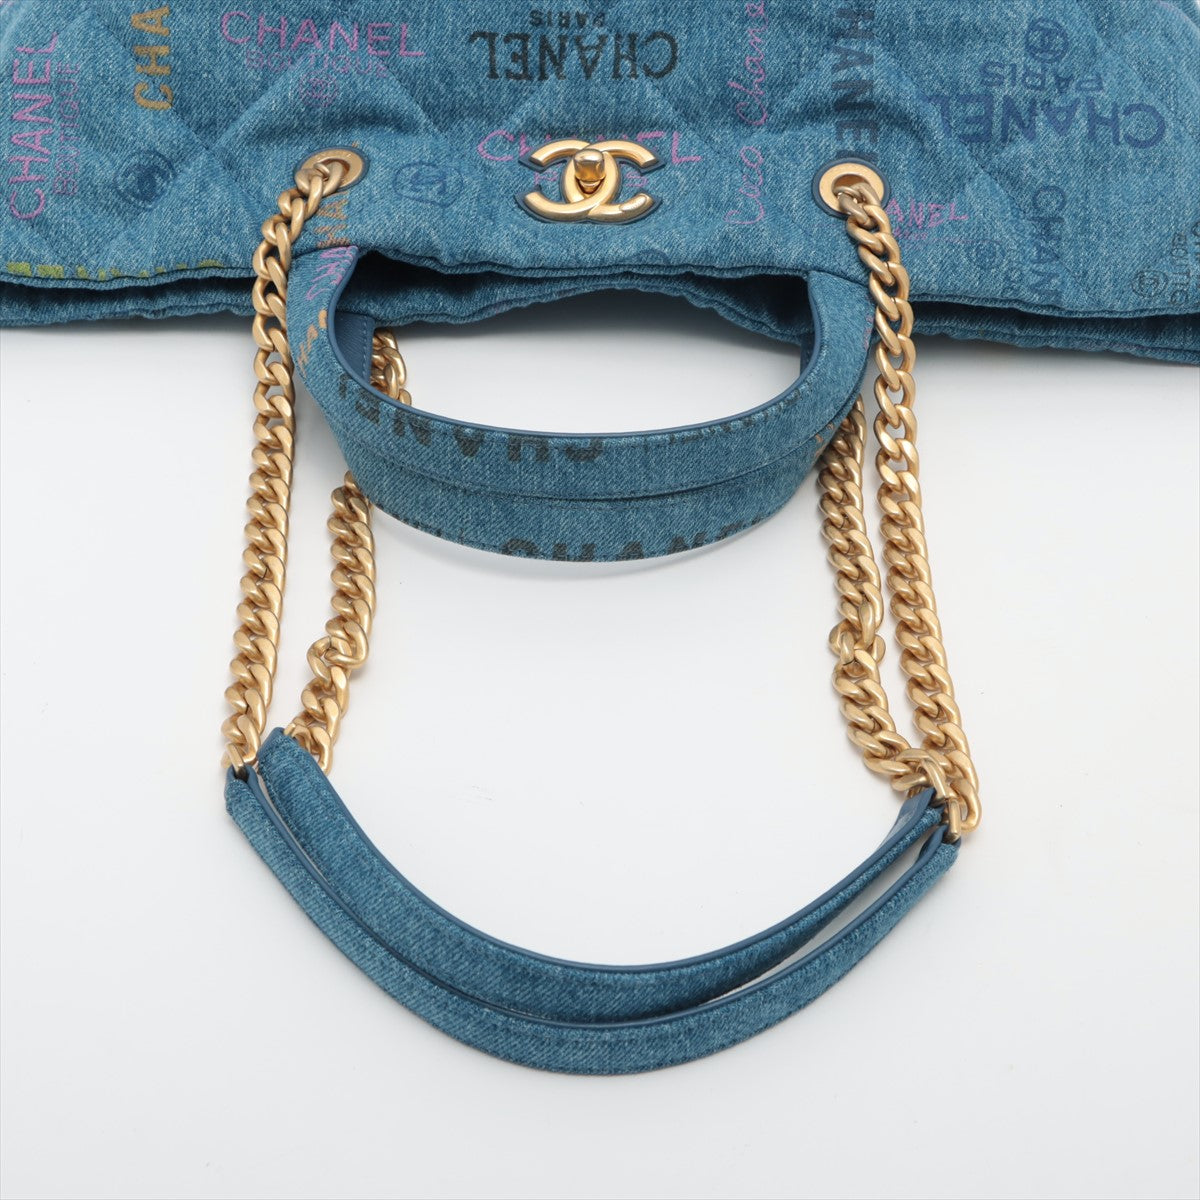 Chanel Matelasse Denim & leather Tote bag Chain shoulder Blue Gold Metal fittings There is an IC chip